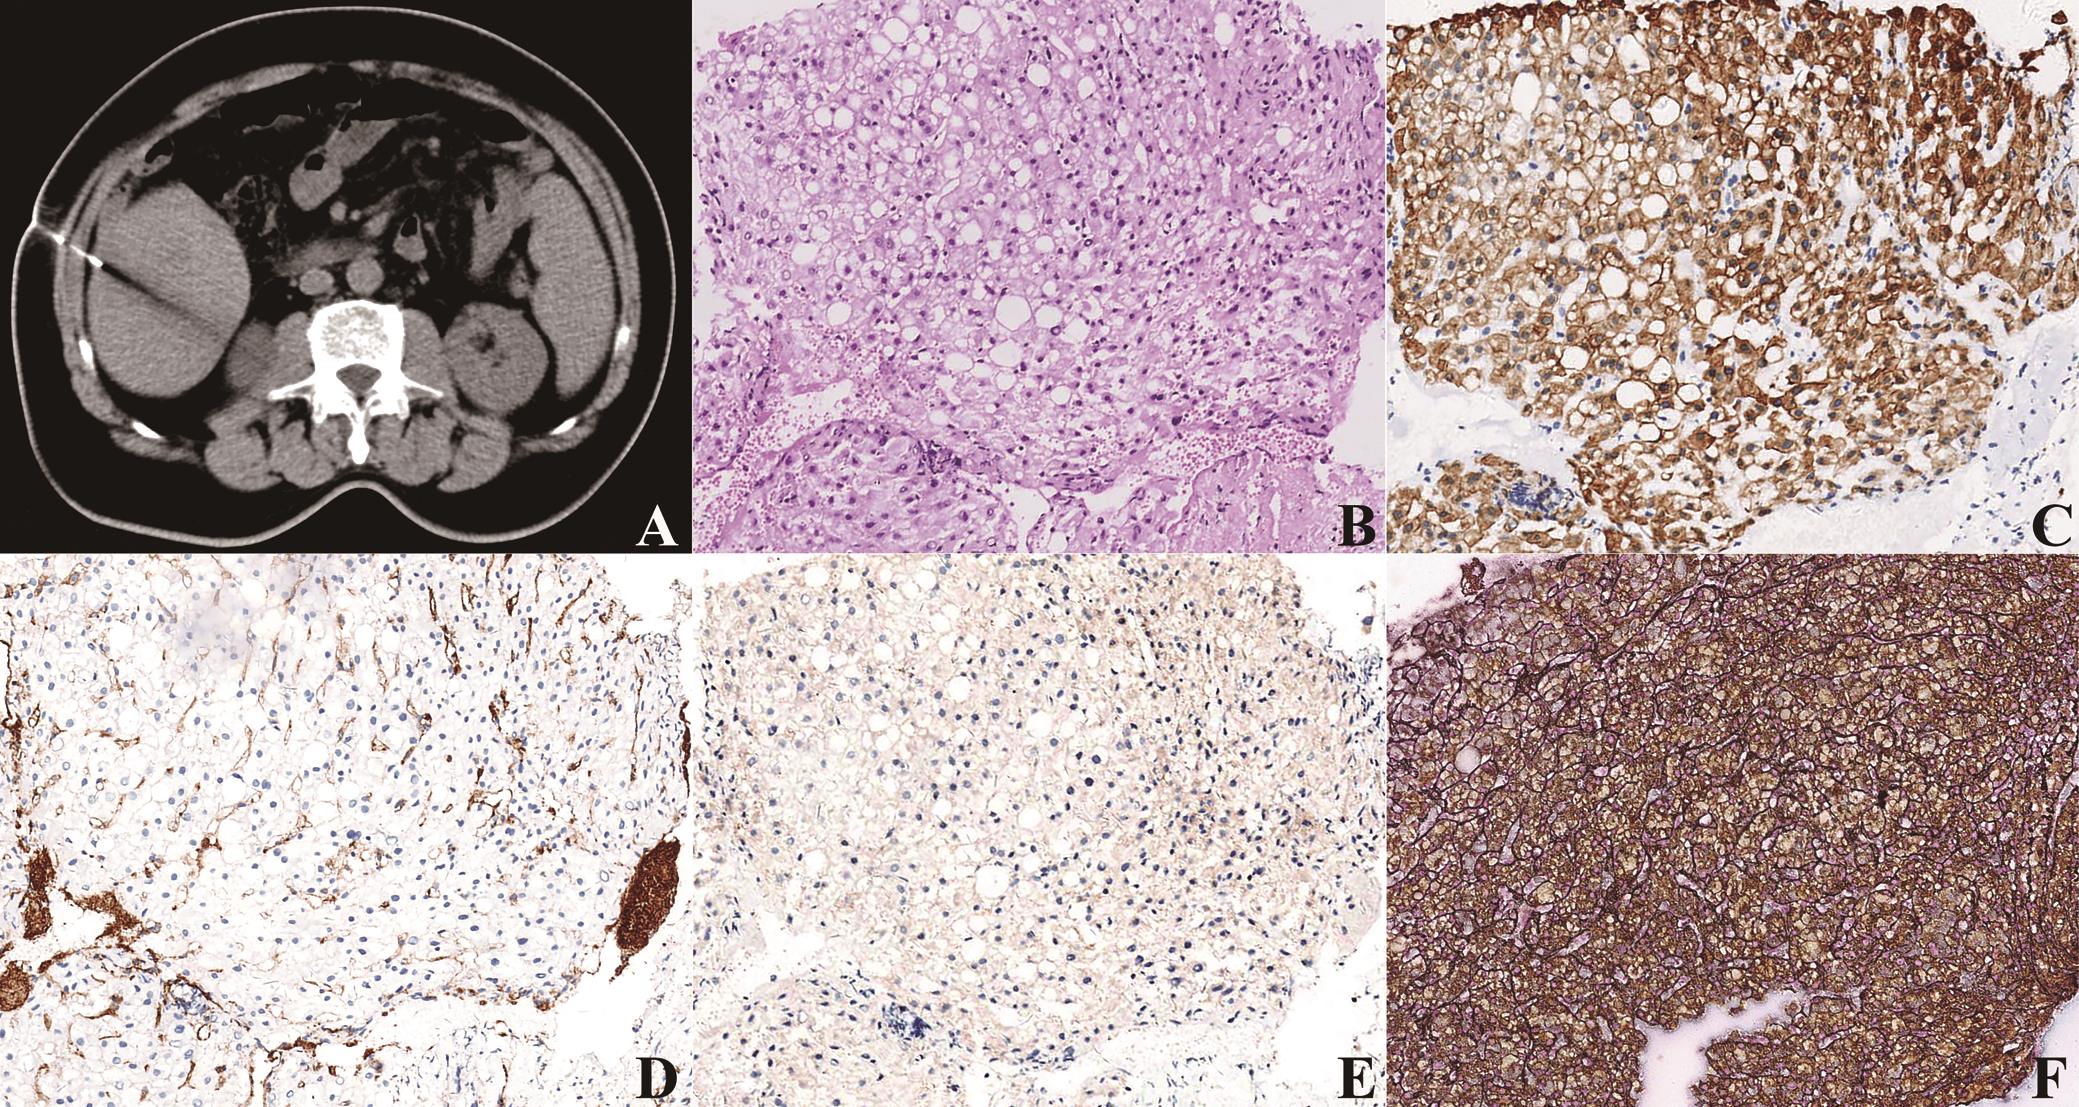 CT-guided percutaneous biopsy and pathological findings of a giant mass in segment VI of the liver